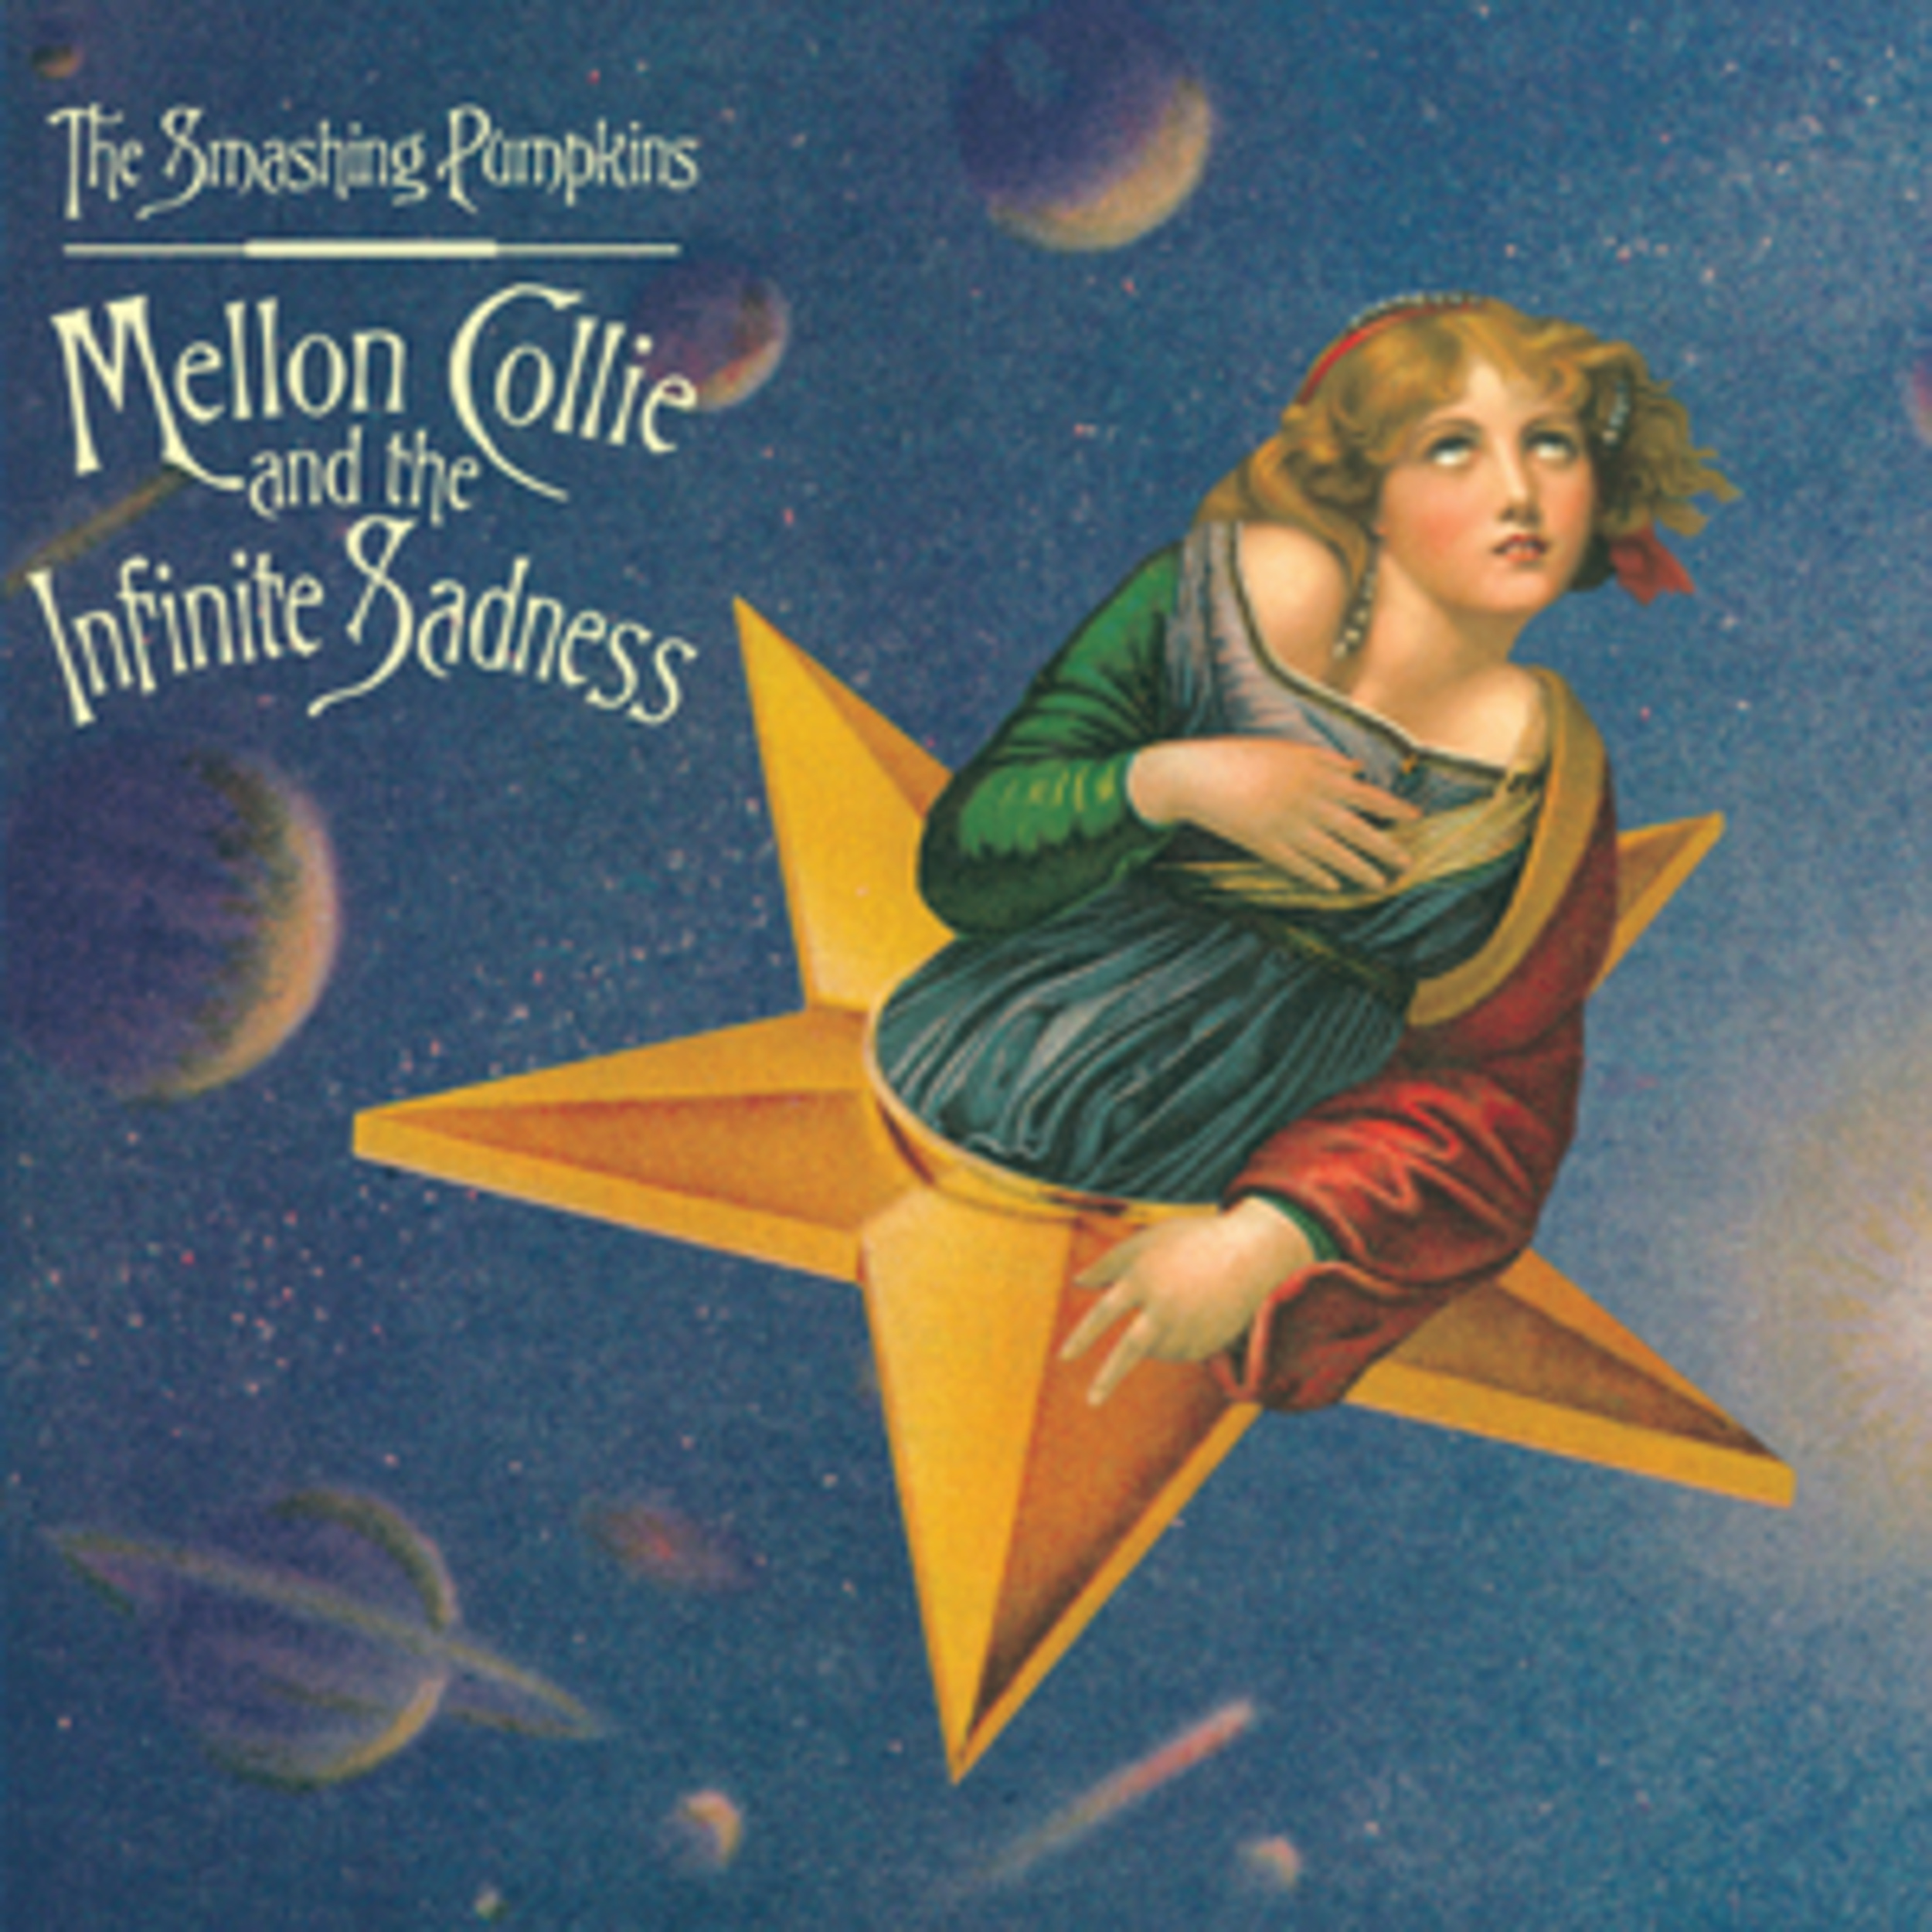 <p>Following the instrumental opener, "Tonight, Tonight" fully ushers the listener into <em>Mellon Collie and the Infinite Sadness</em><a href="https://www.youtube.com/watch?v=NOG3eus4ZSo"><em>. </em>It's almost like a grand opening number to a Broadway musical.</a> T<span>he song was the fourth single released off the album and became synonymous with the overall bombast of the overall <em>Mellon Collie </em>project. There's a nod to the Pumpkins' hometown of Chicago. (The original four members hail from the surrounding suburbs of the greater Chicago area.)</span></p>